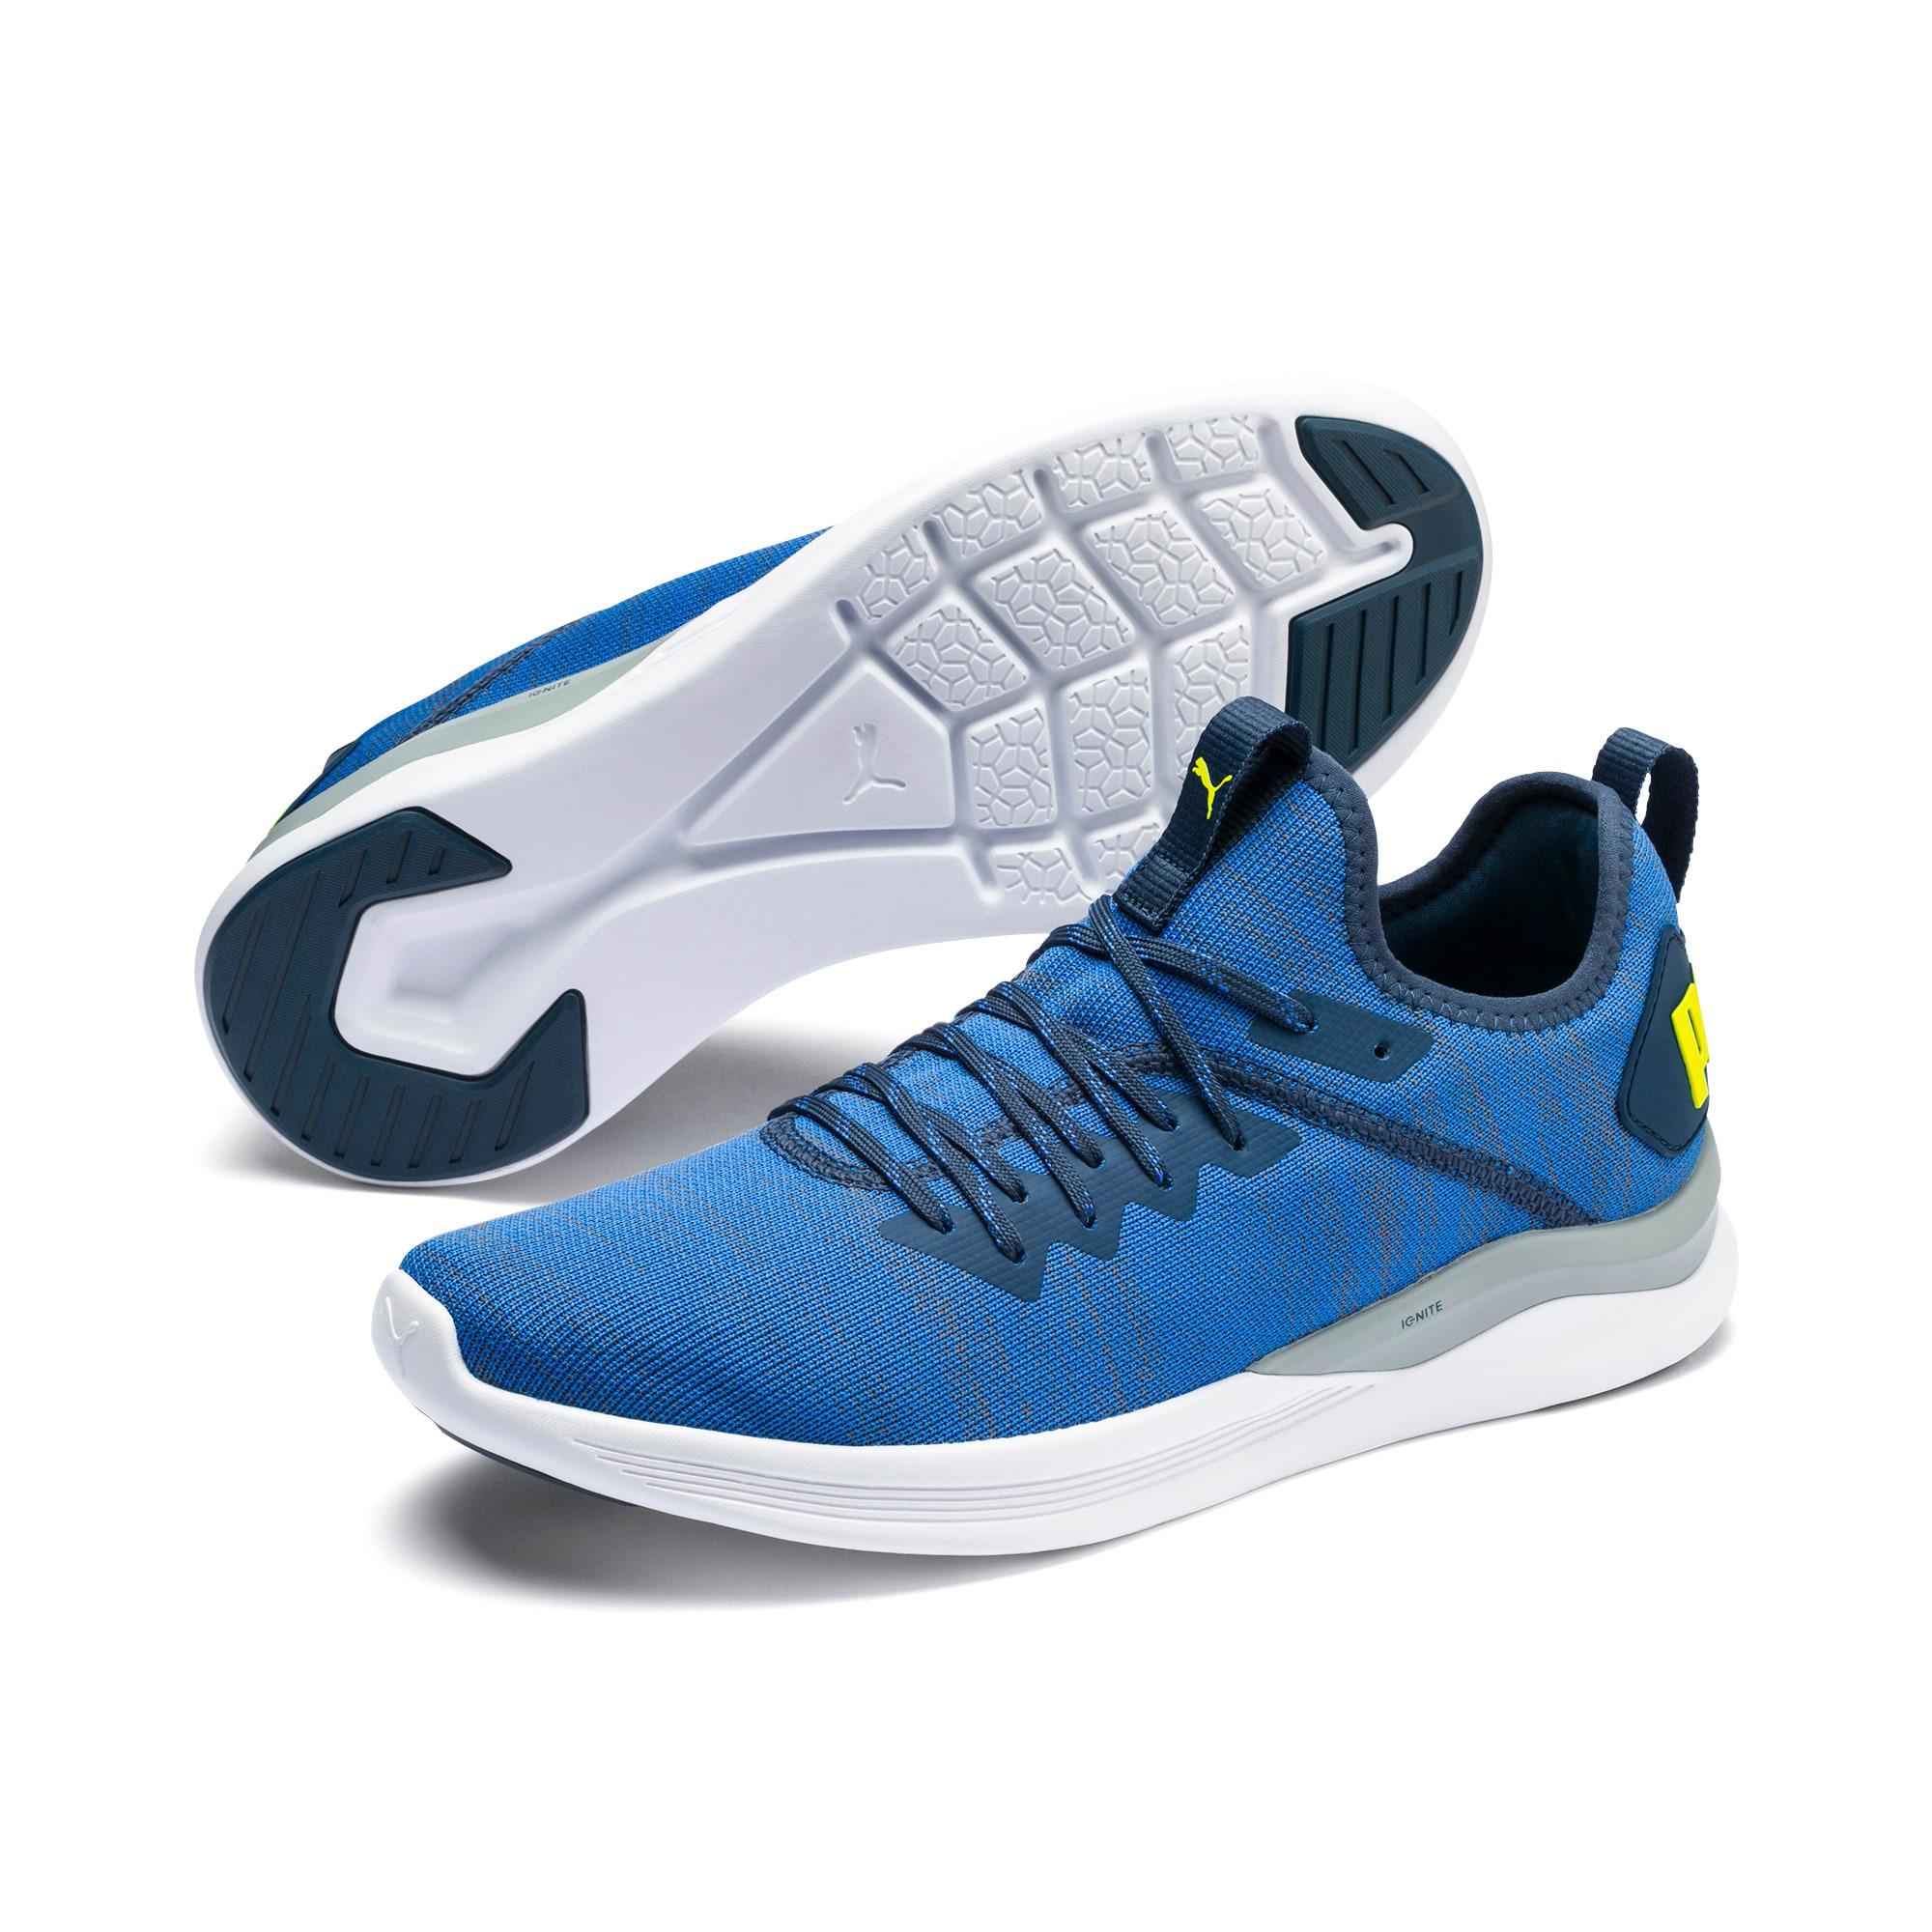 PUMA Lace Ignite Flash Evoknit Training Shoes in Blue for Men - Save 45 ...